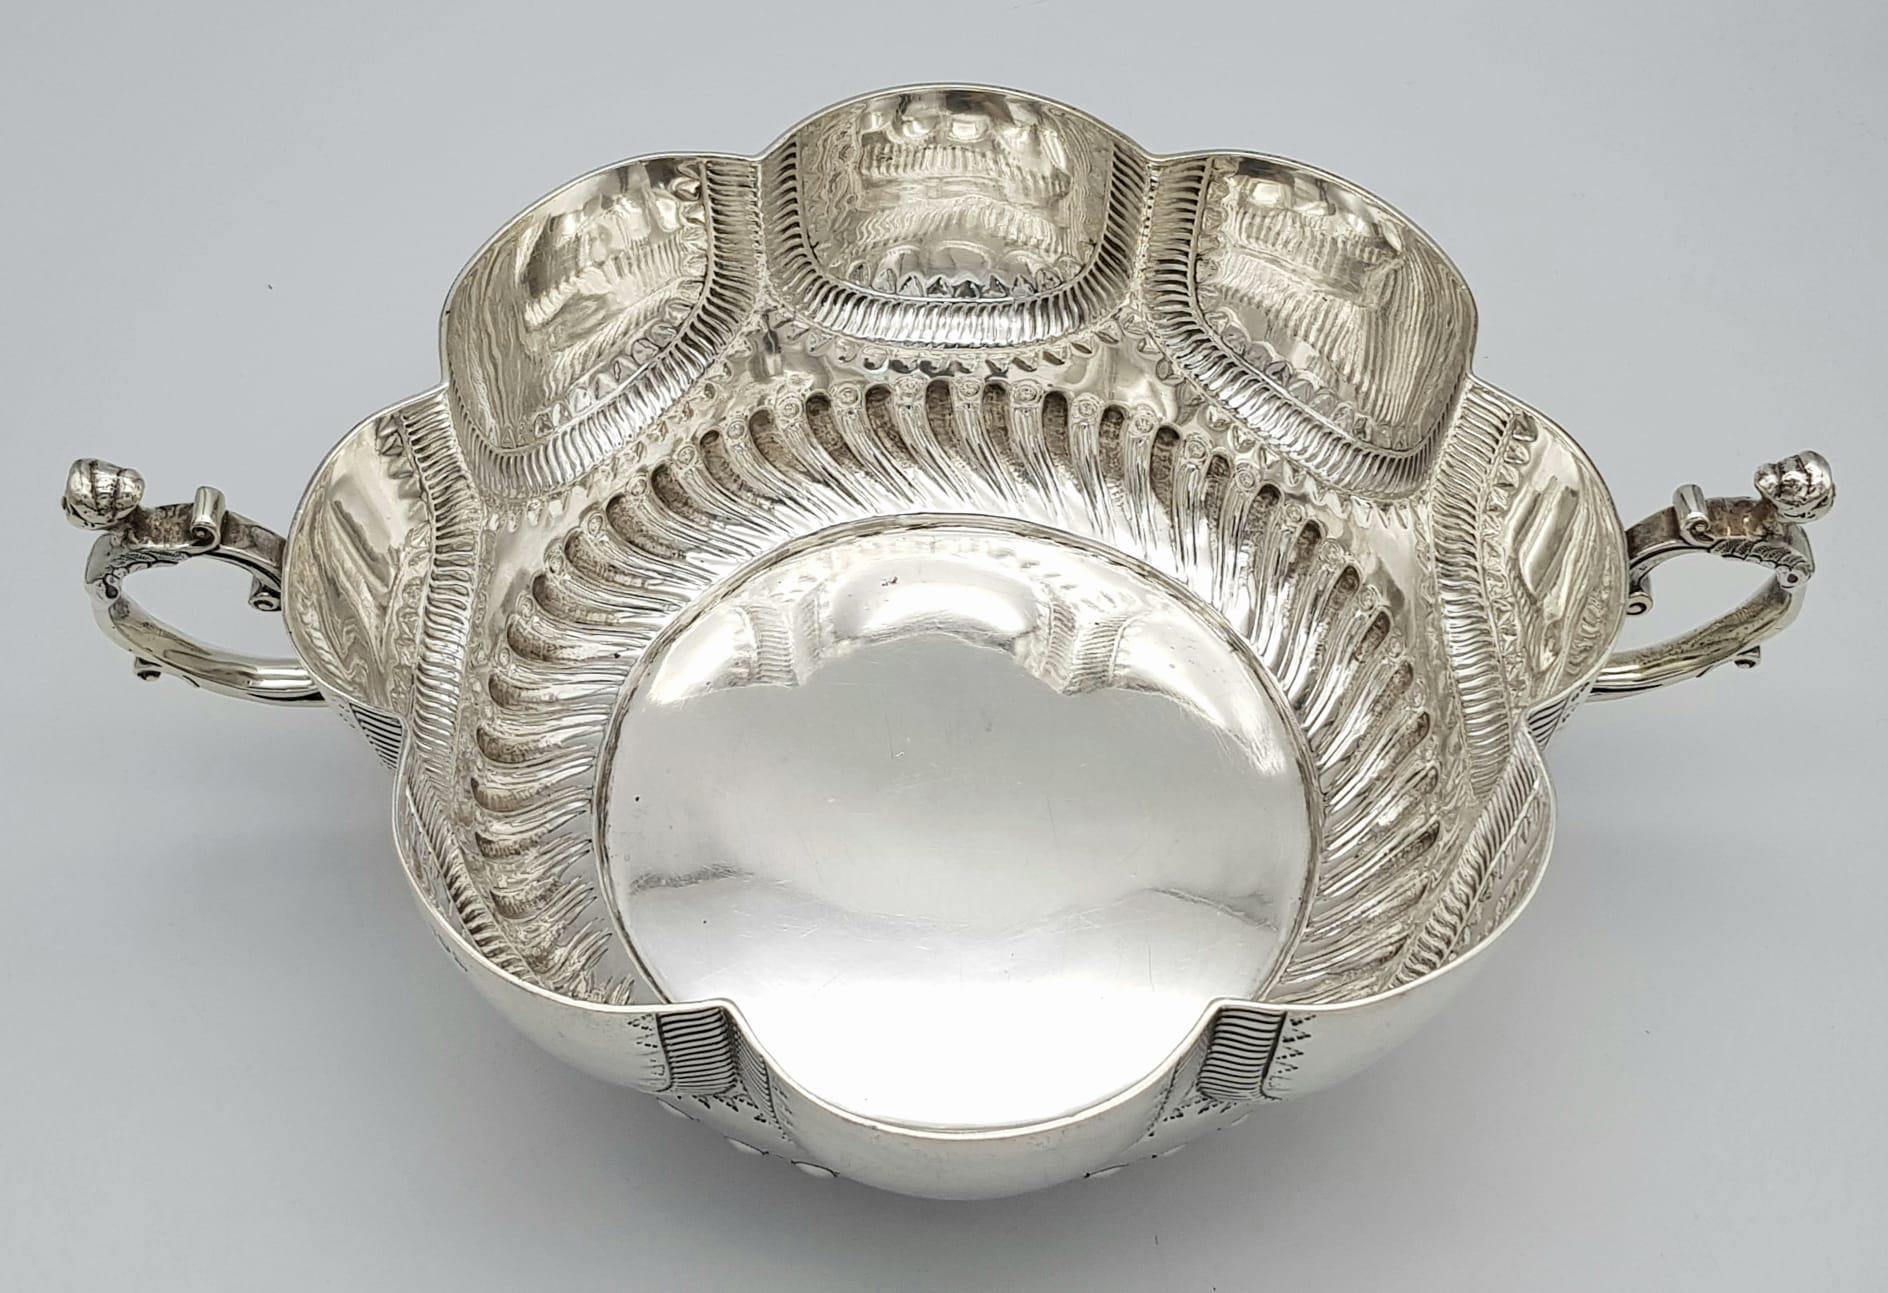 A BEAUTIFULLY ORNATE HAND ENGRAVED SOLID SILVER PUNCH BOWL MADE BY LAMBERT OF COVENTRY STREET , - Image 3 of 7